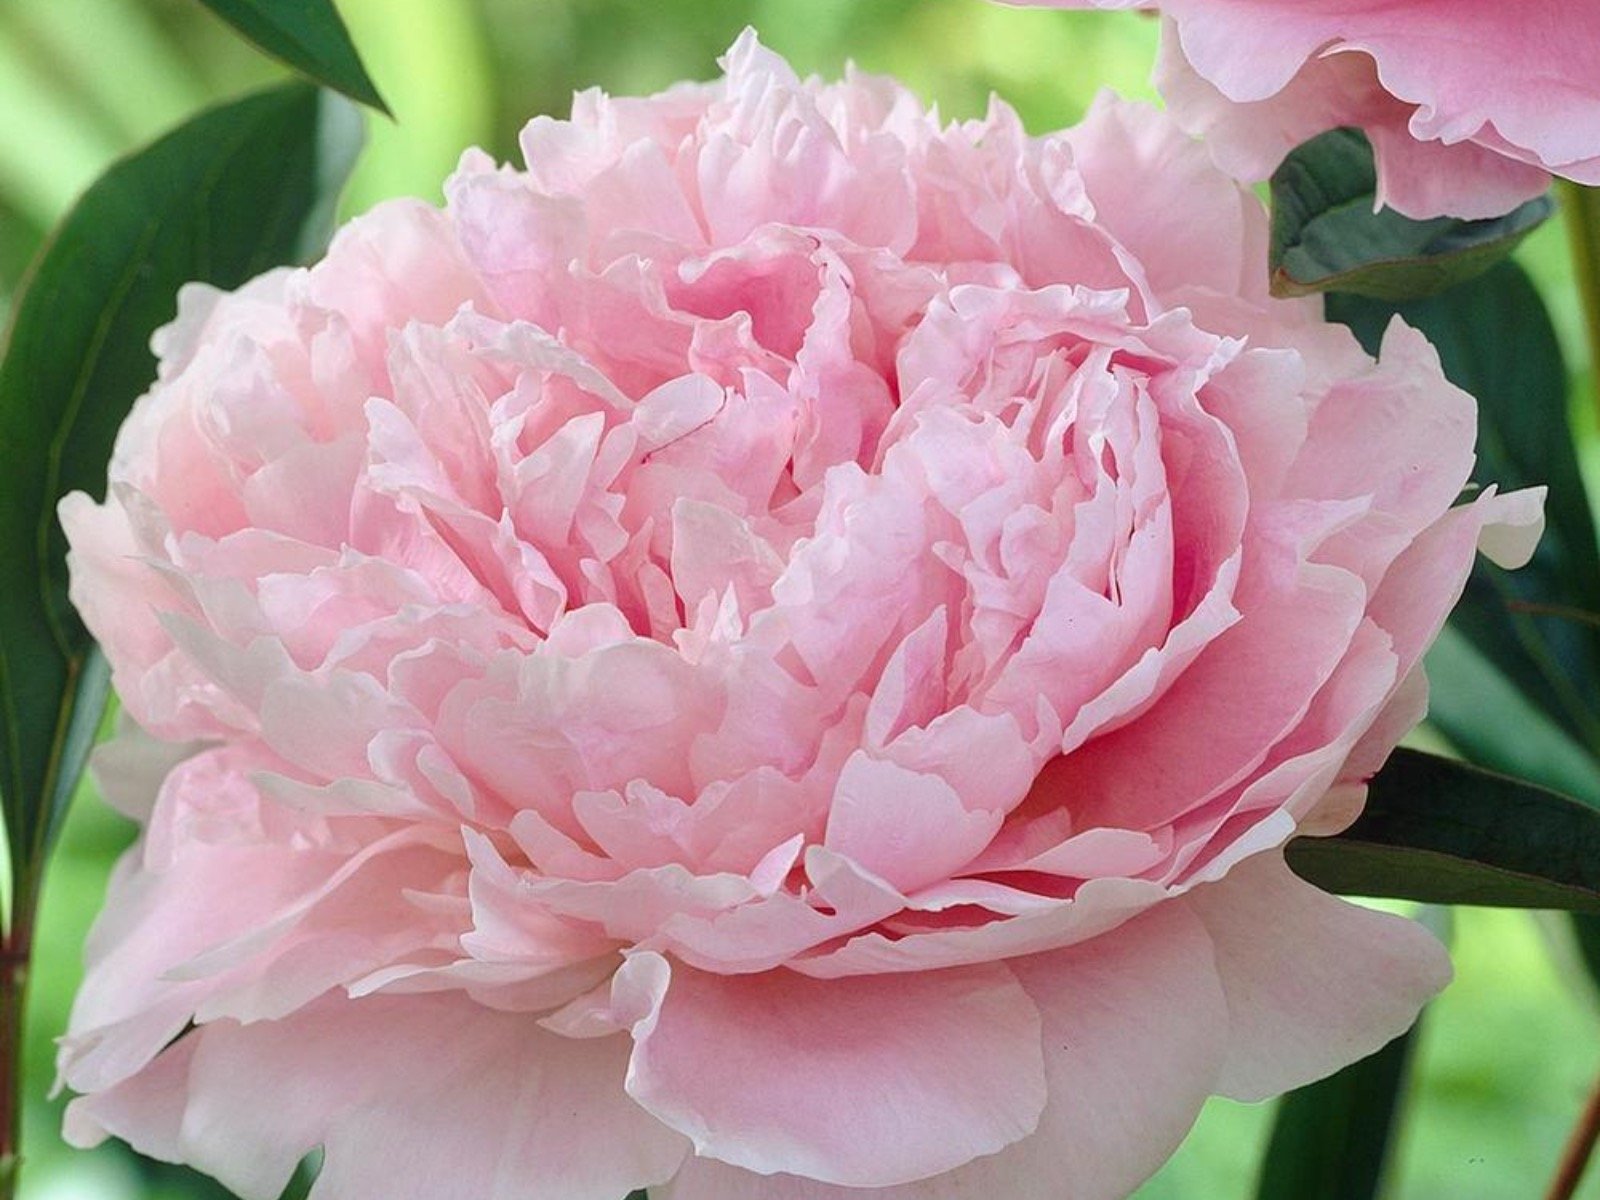 When to plant peonies – for a wonderful early summer show